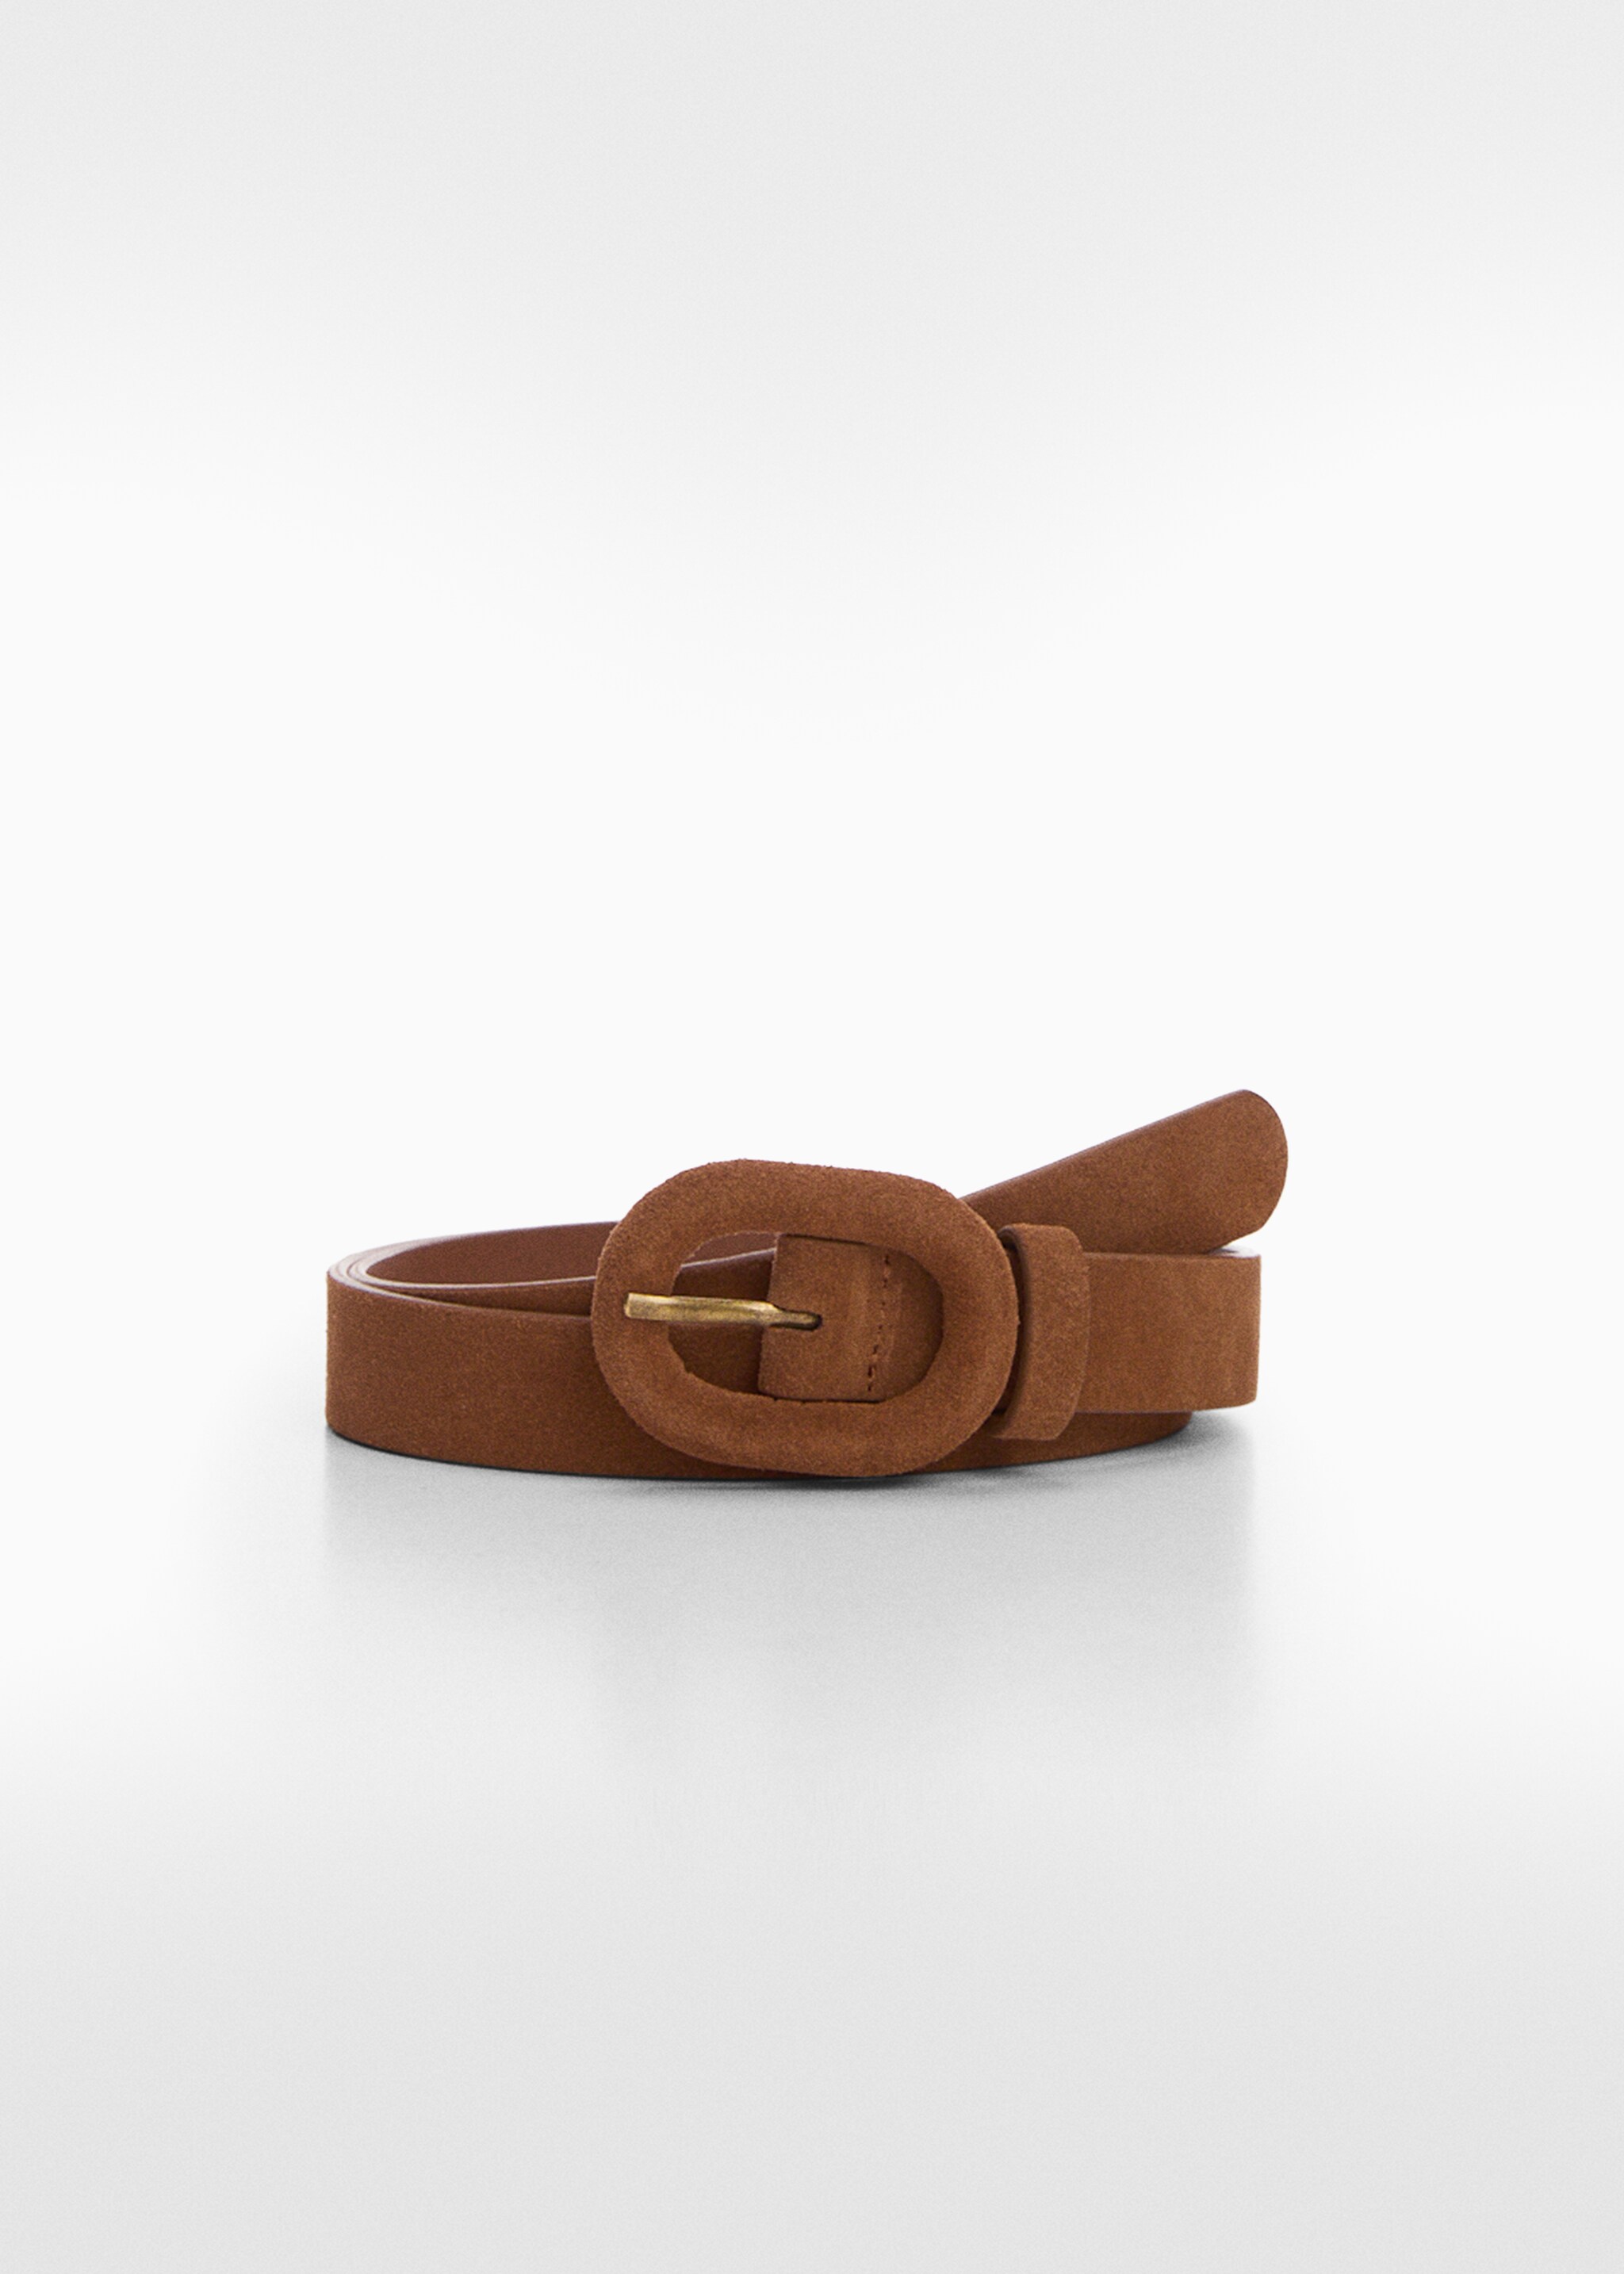 Leather belt with wide buckle - Article without model